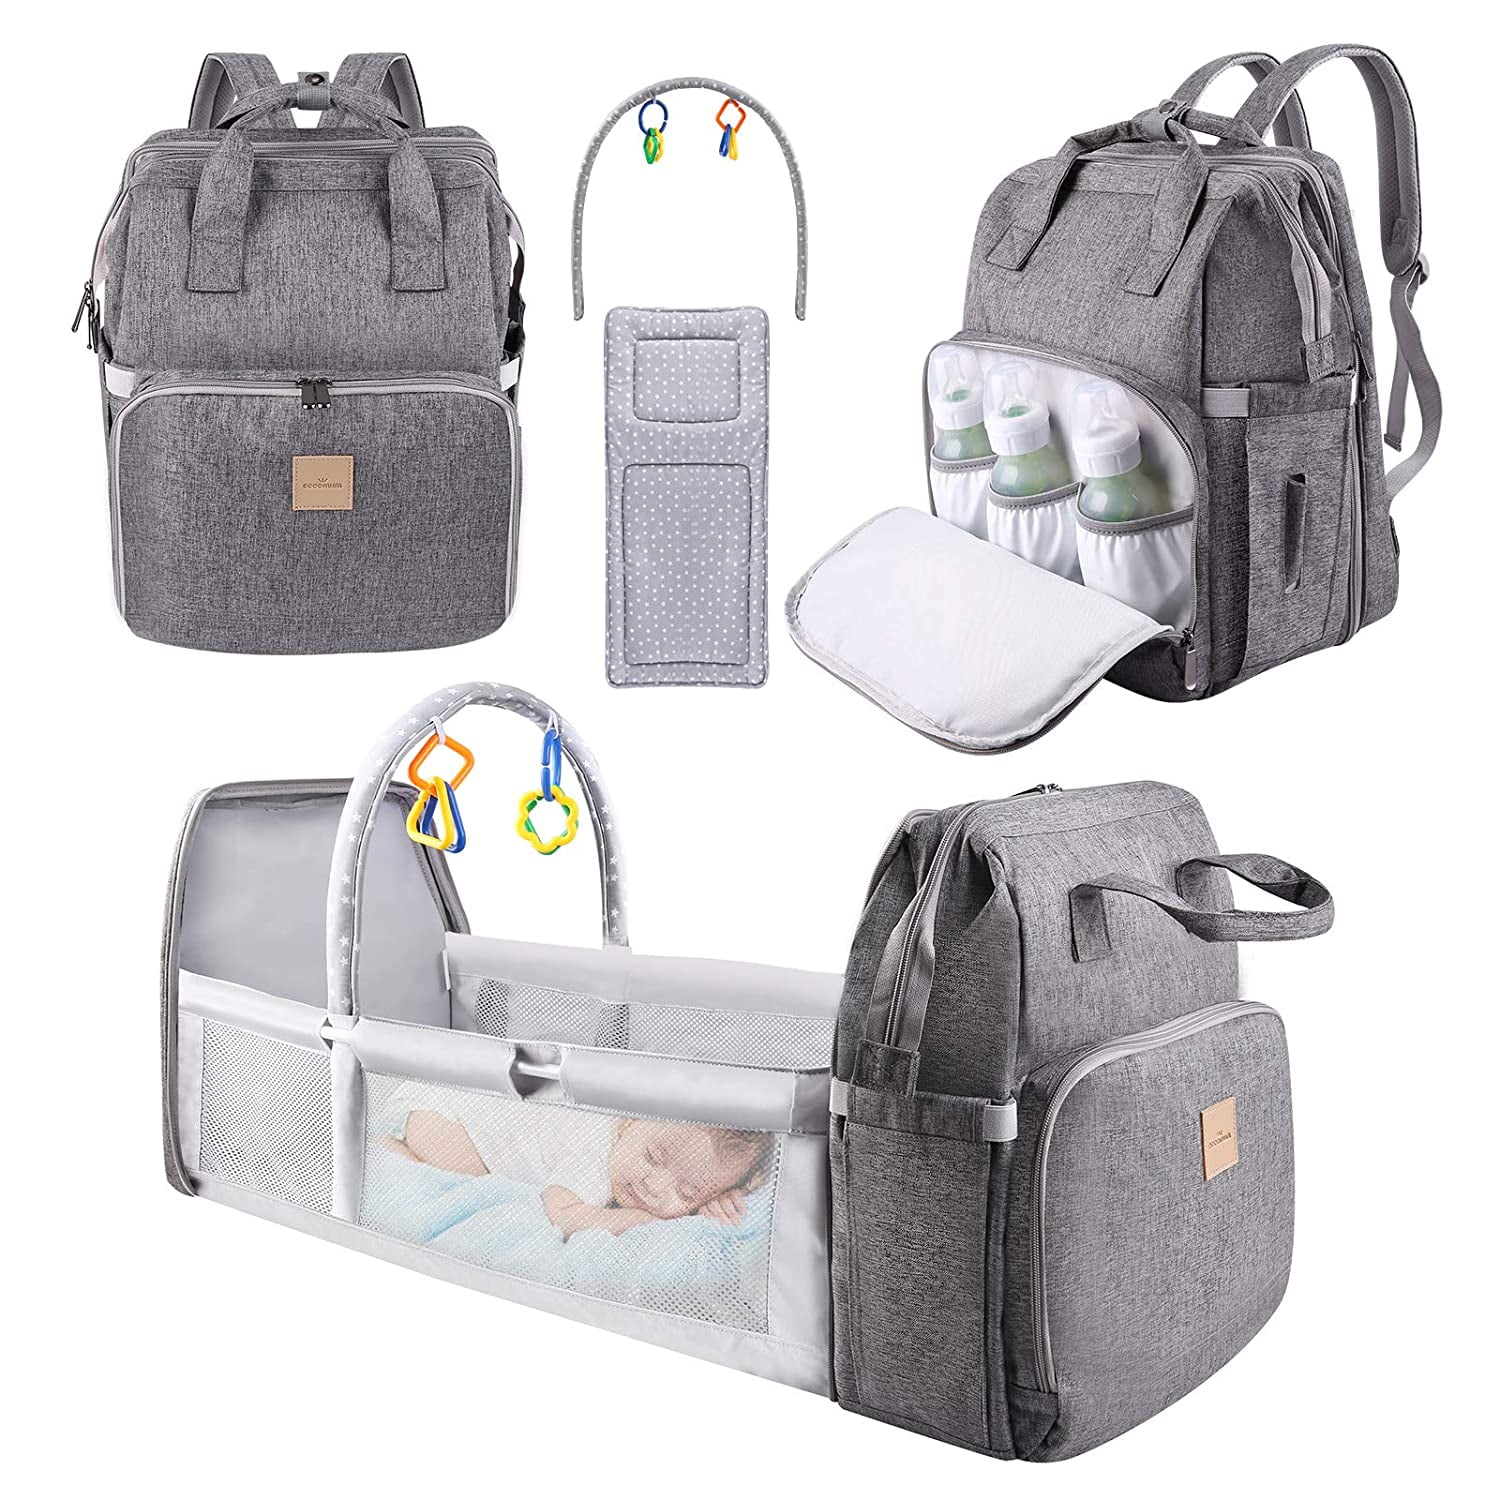 Baby Changing Backpack Nappy Diaper Bag Mums Dads Large Rucksack w/ USB Port US 